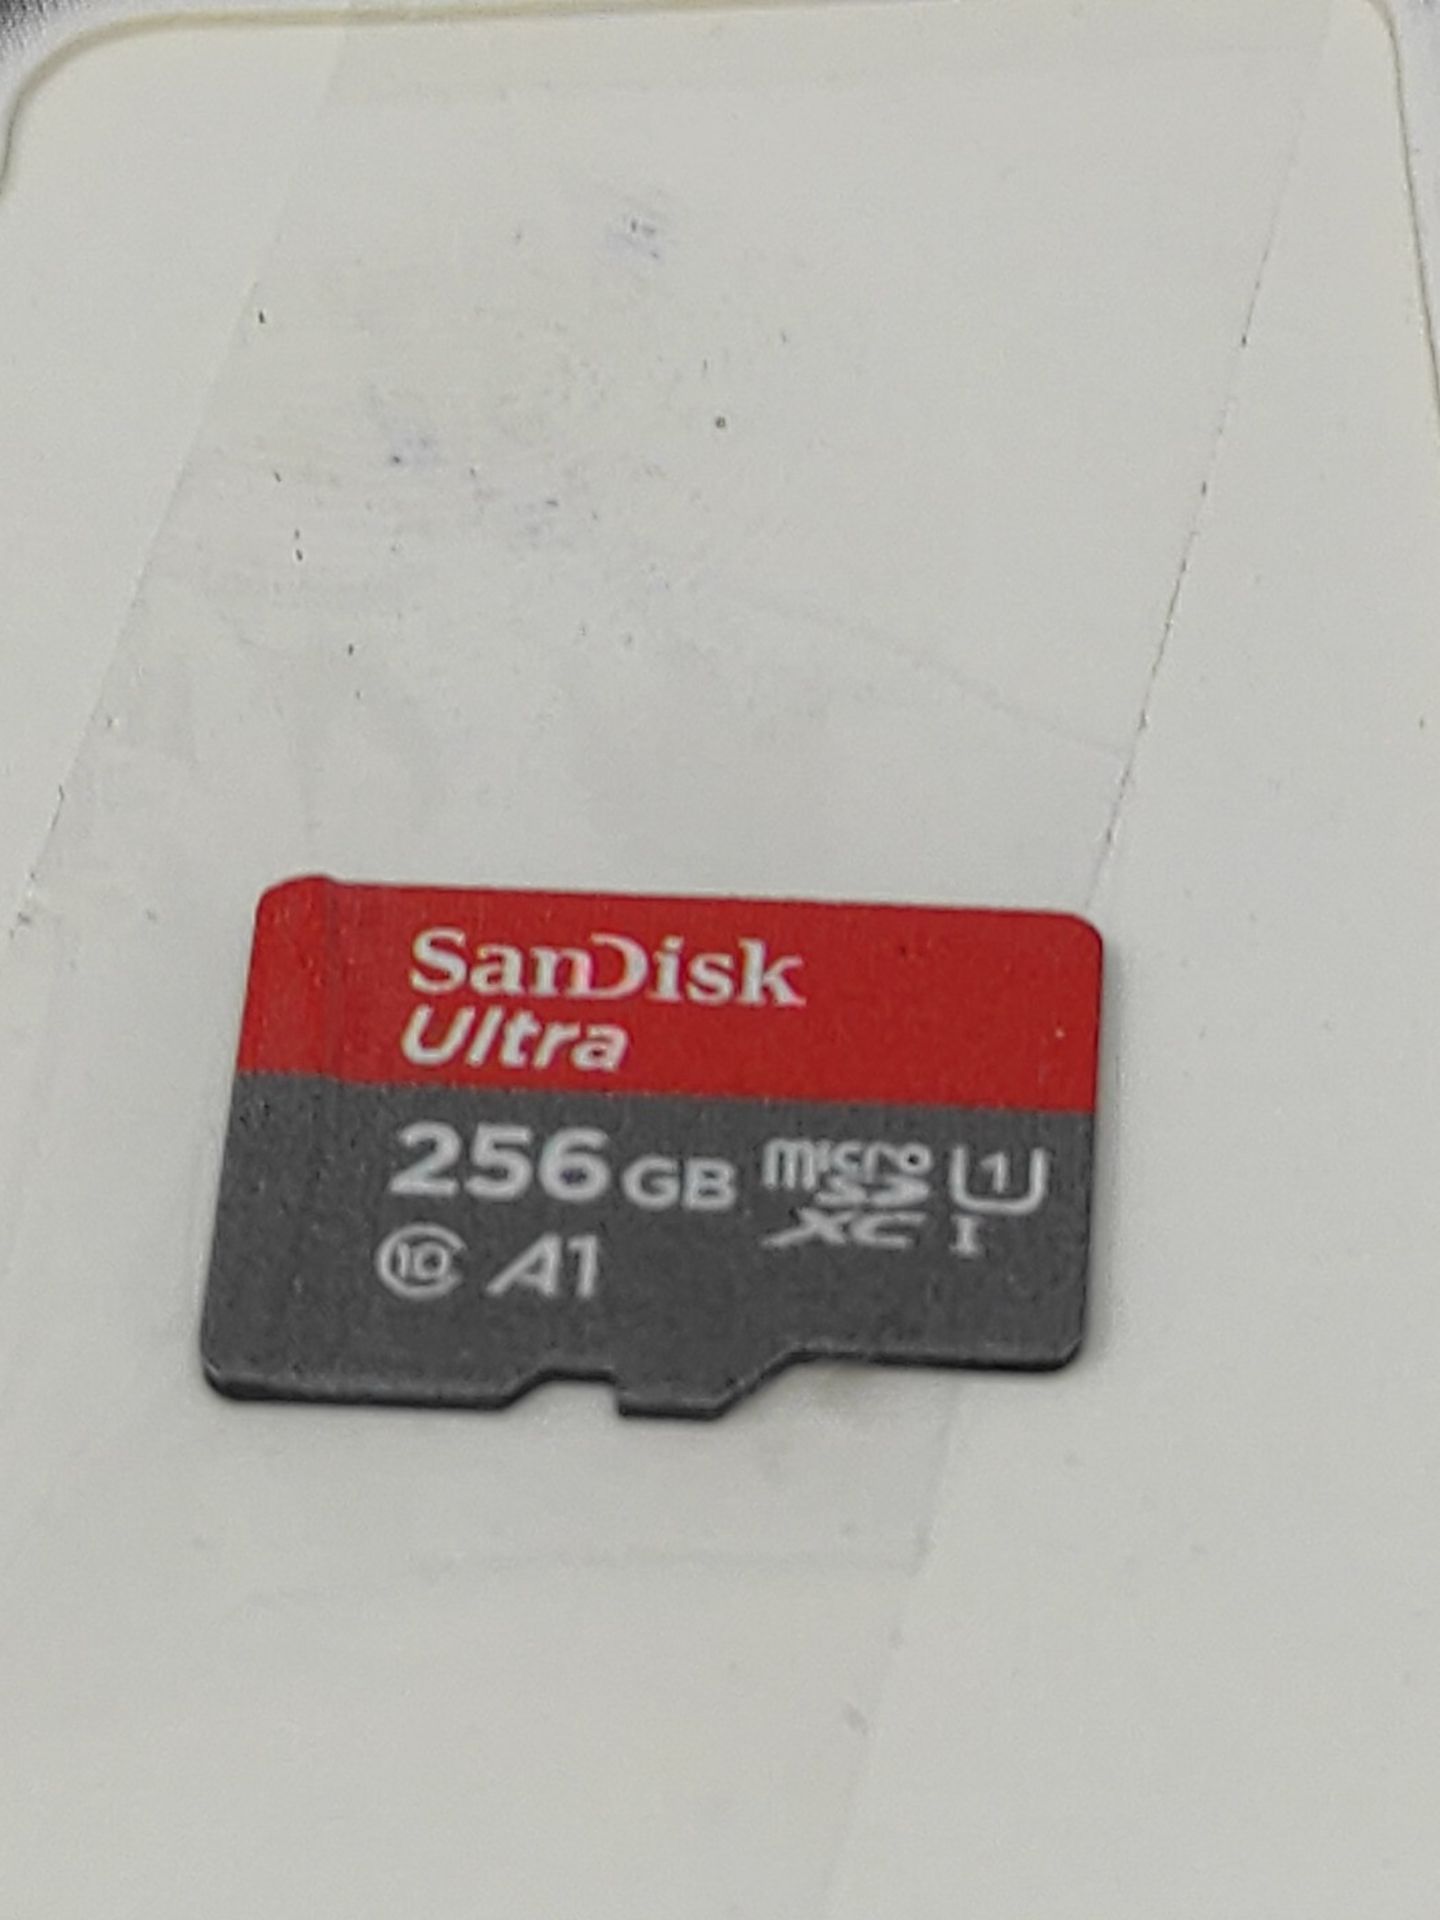 SanDisk Ultra Android microSDXC UHS-I Memory Card 256GB + Adapter (For Smartphones and - Image 2 of 4